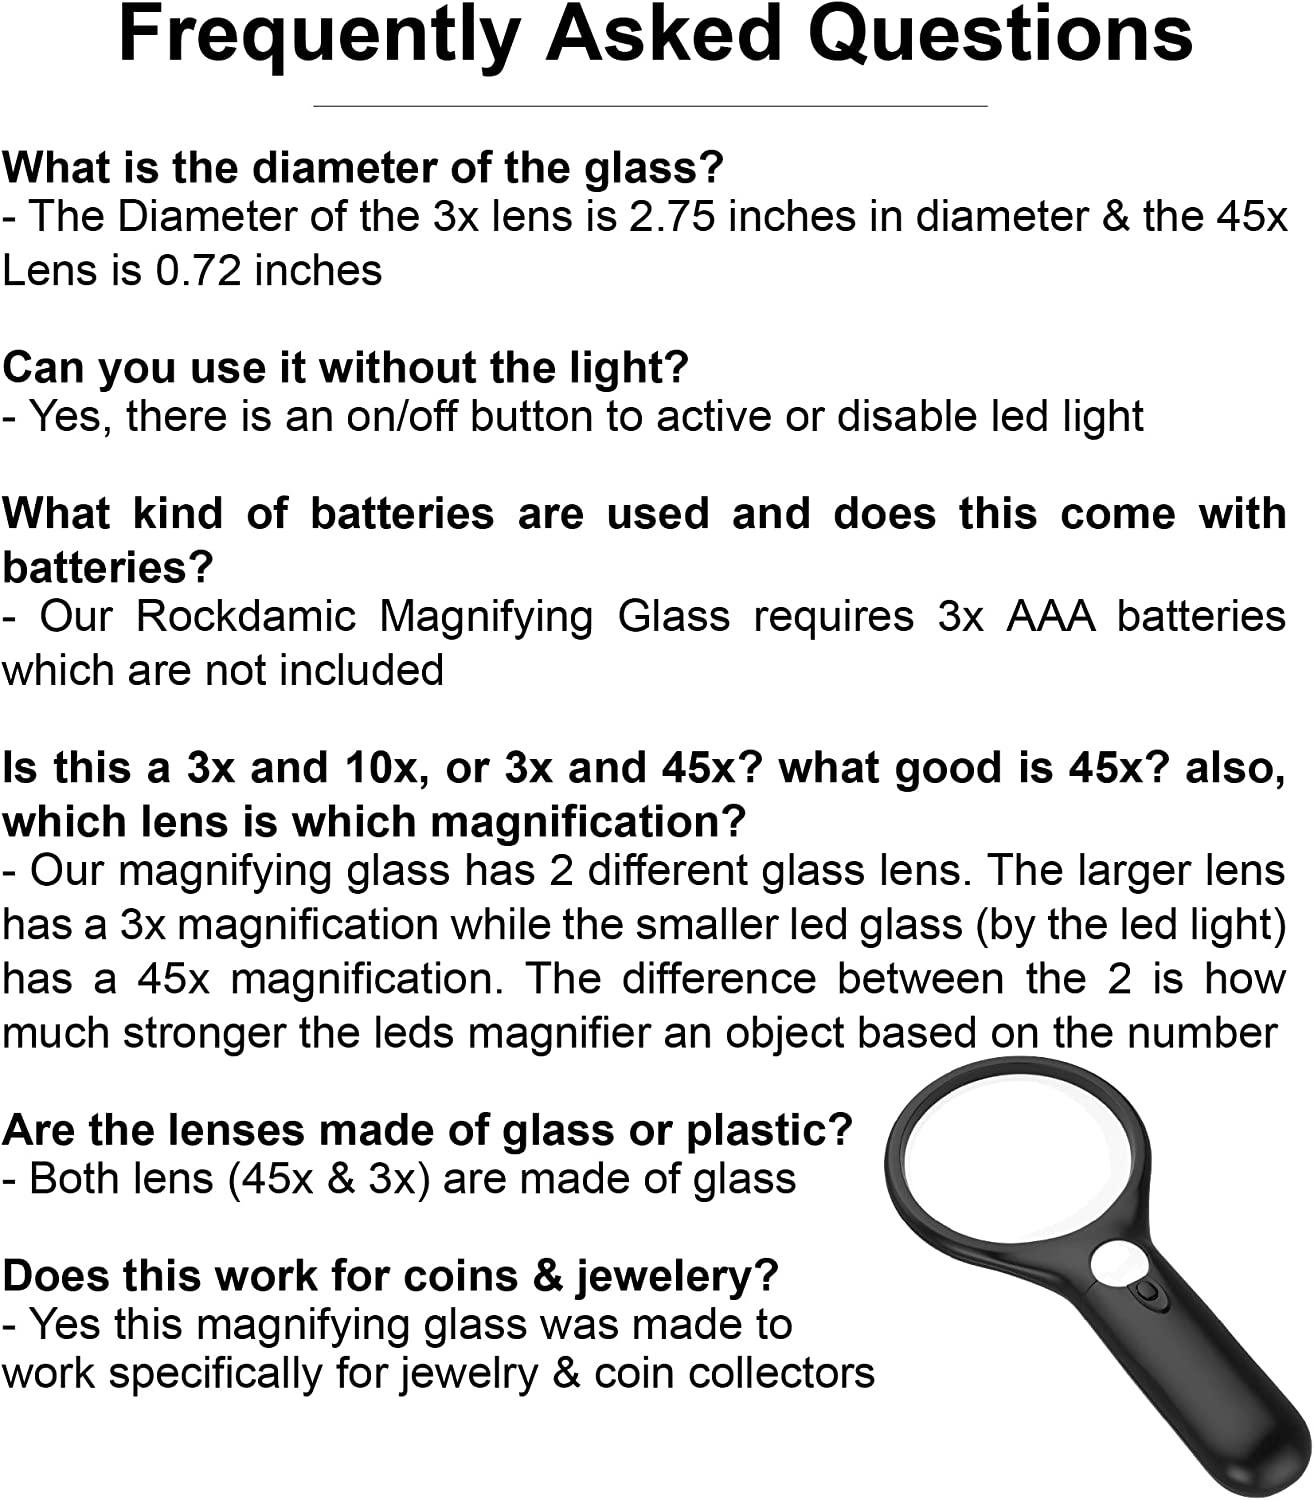 RockDaMic Professional Magnifying Glass with Light (3X / 45x) Large Lighted  Handheld Glass Magnifier Lupa for Reading, Jewelry, Coins, Stamps, Fine  Print - Strongest Magnify for Kids & Seniors